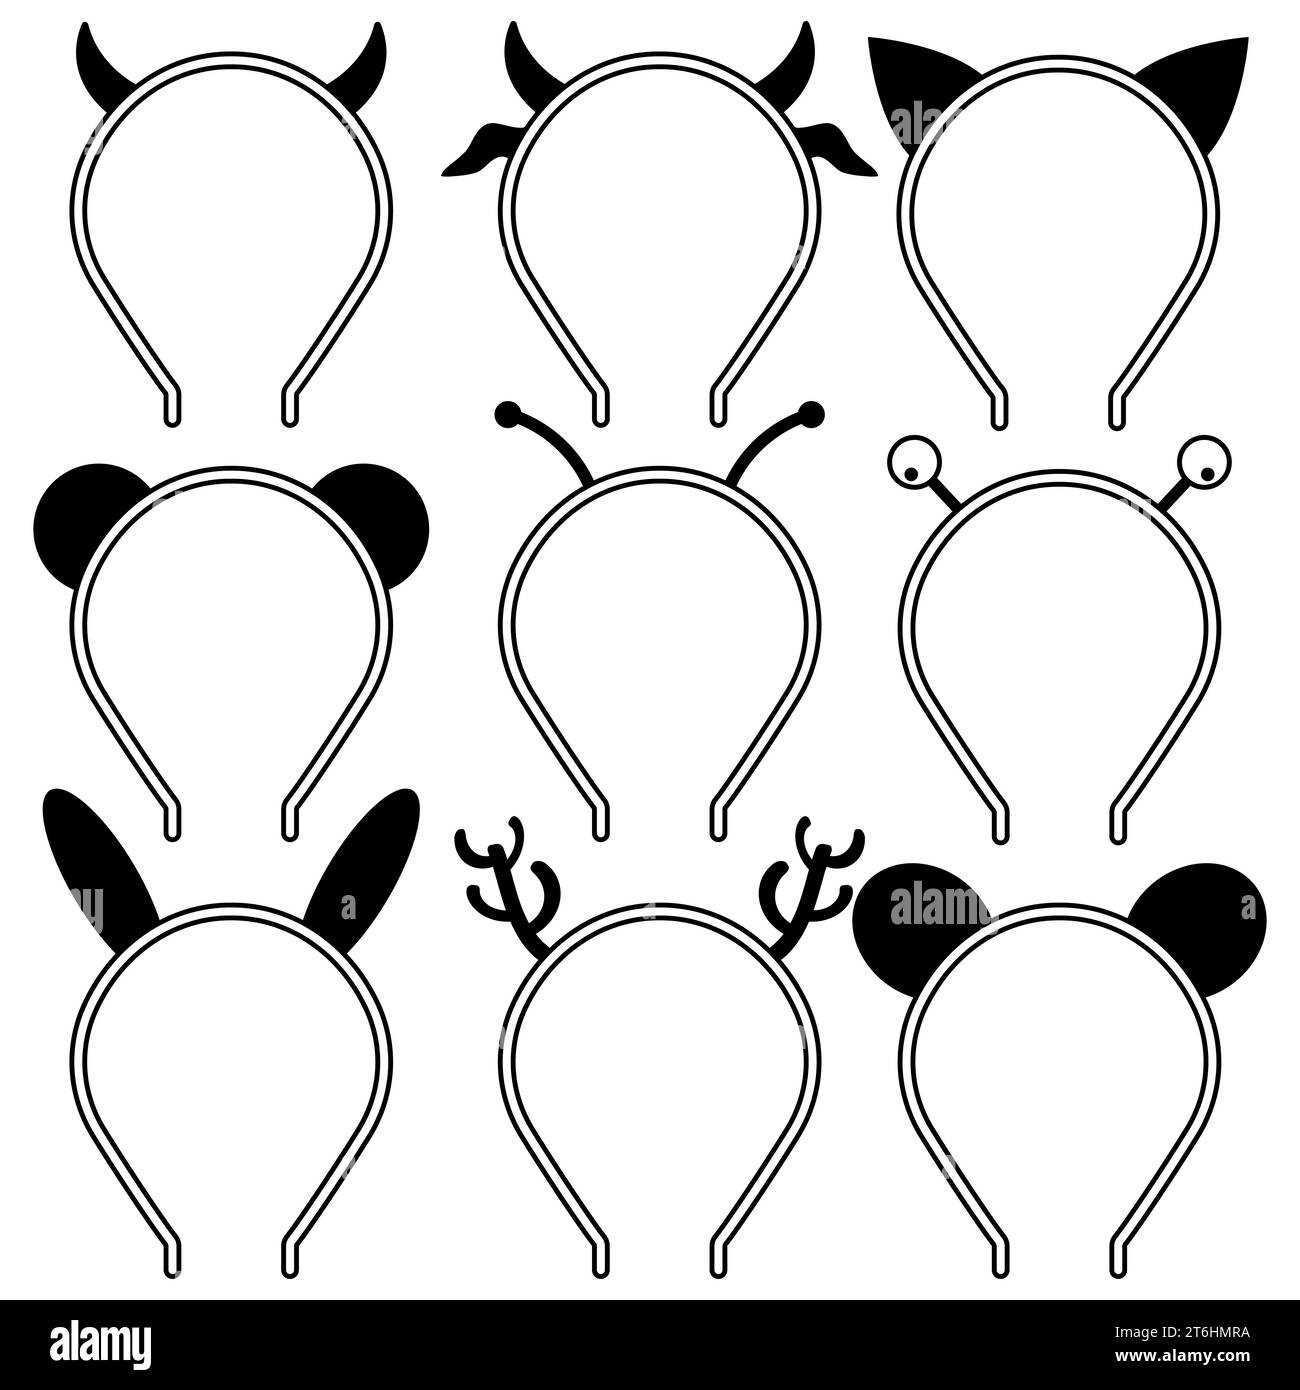 Set of headbands, headdresses, hearbands with ears and horns animals and other characters. Set of icons horns devil, cow, deer, bee. Stock Vector